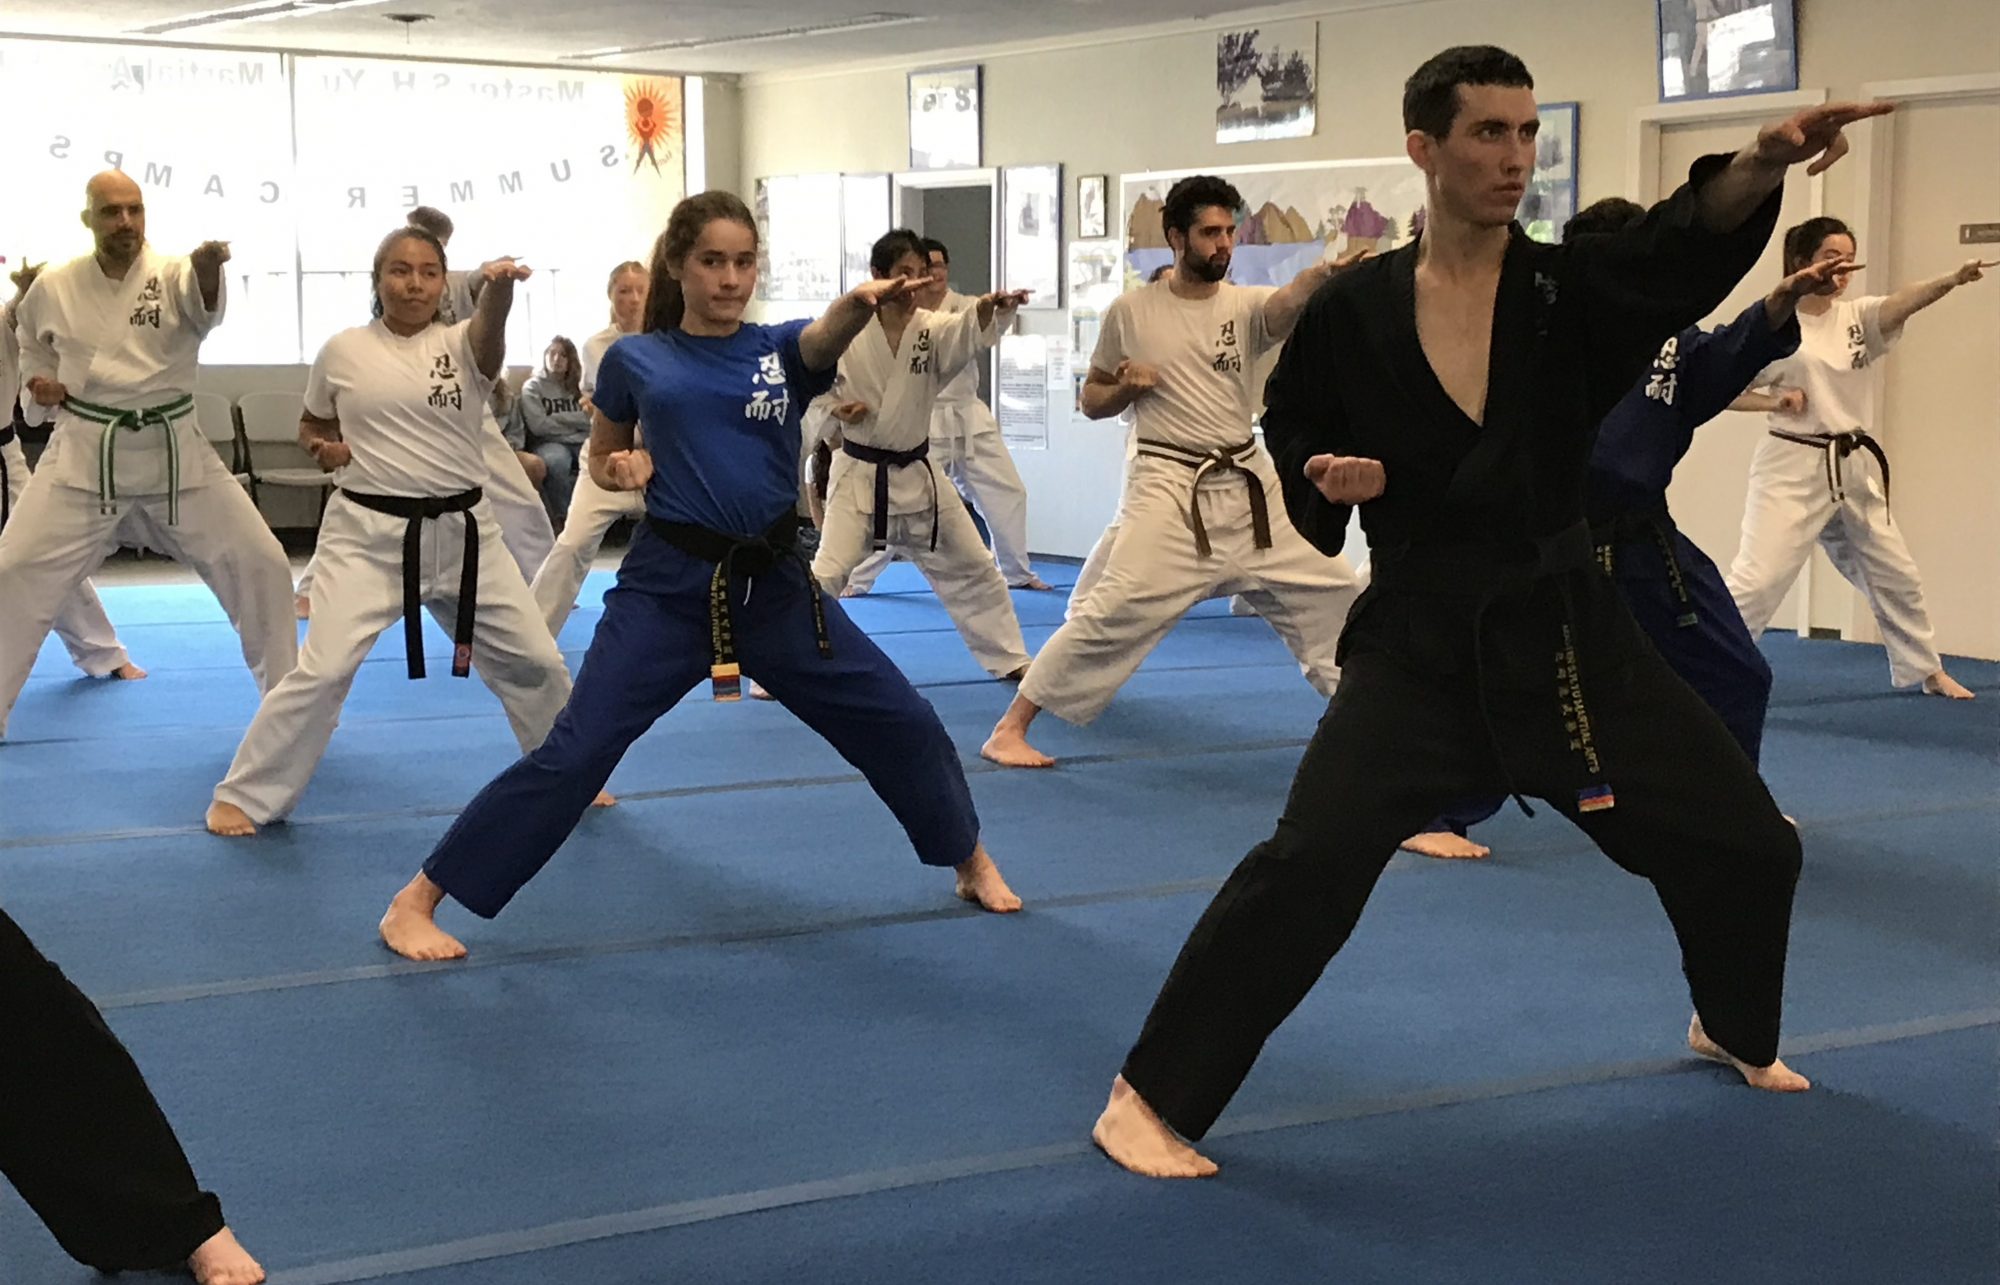 What Are The Skills That Martial Arts Offer To Its Practitioners